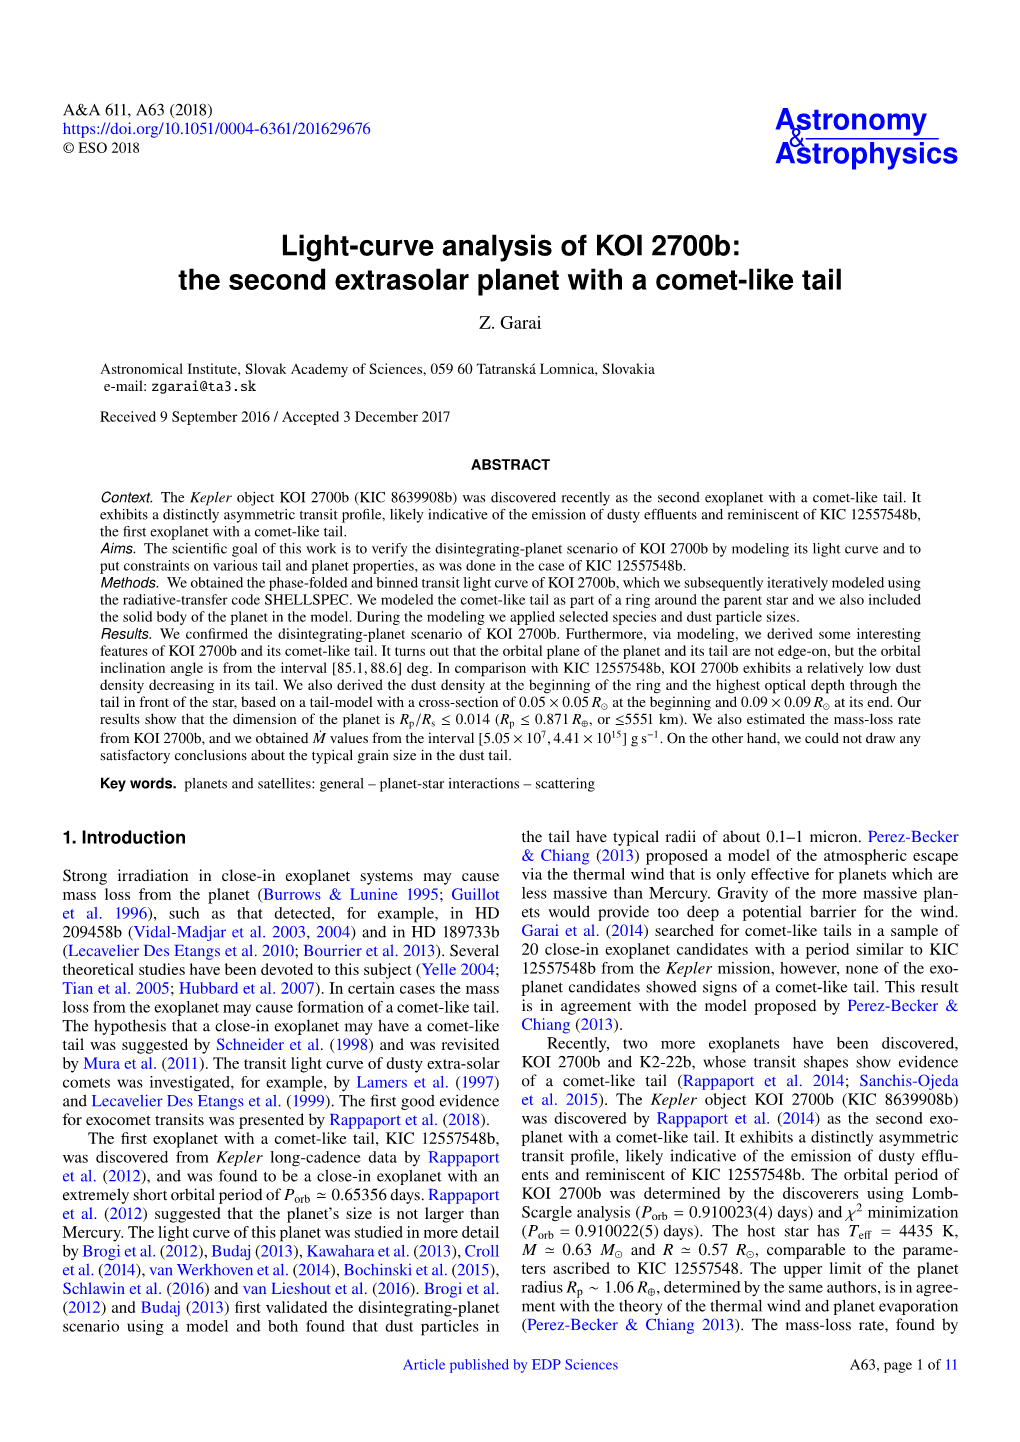 Light-Curve Analysis of KOI 2700B: the Second Extrasolar Planet with a Comet-Like Tail Z